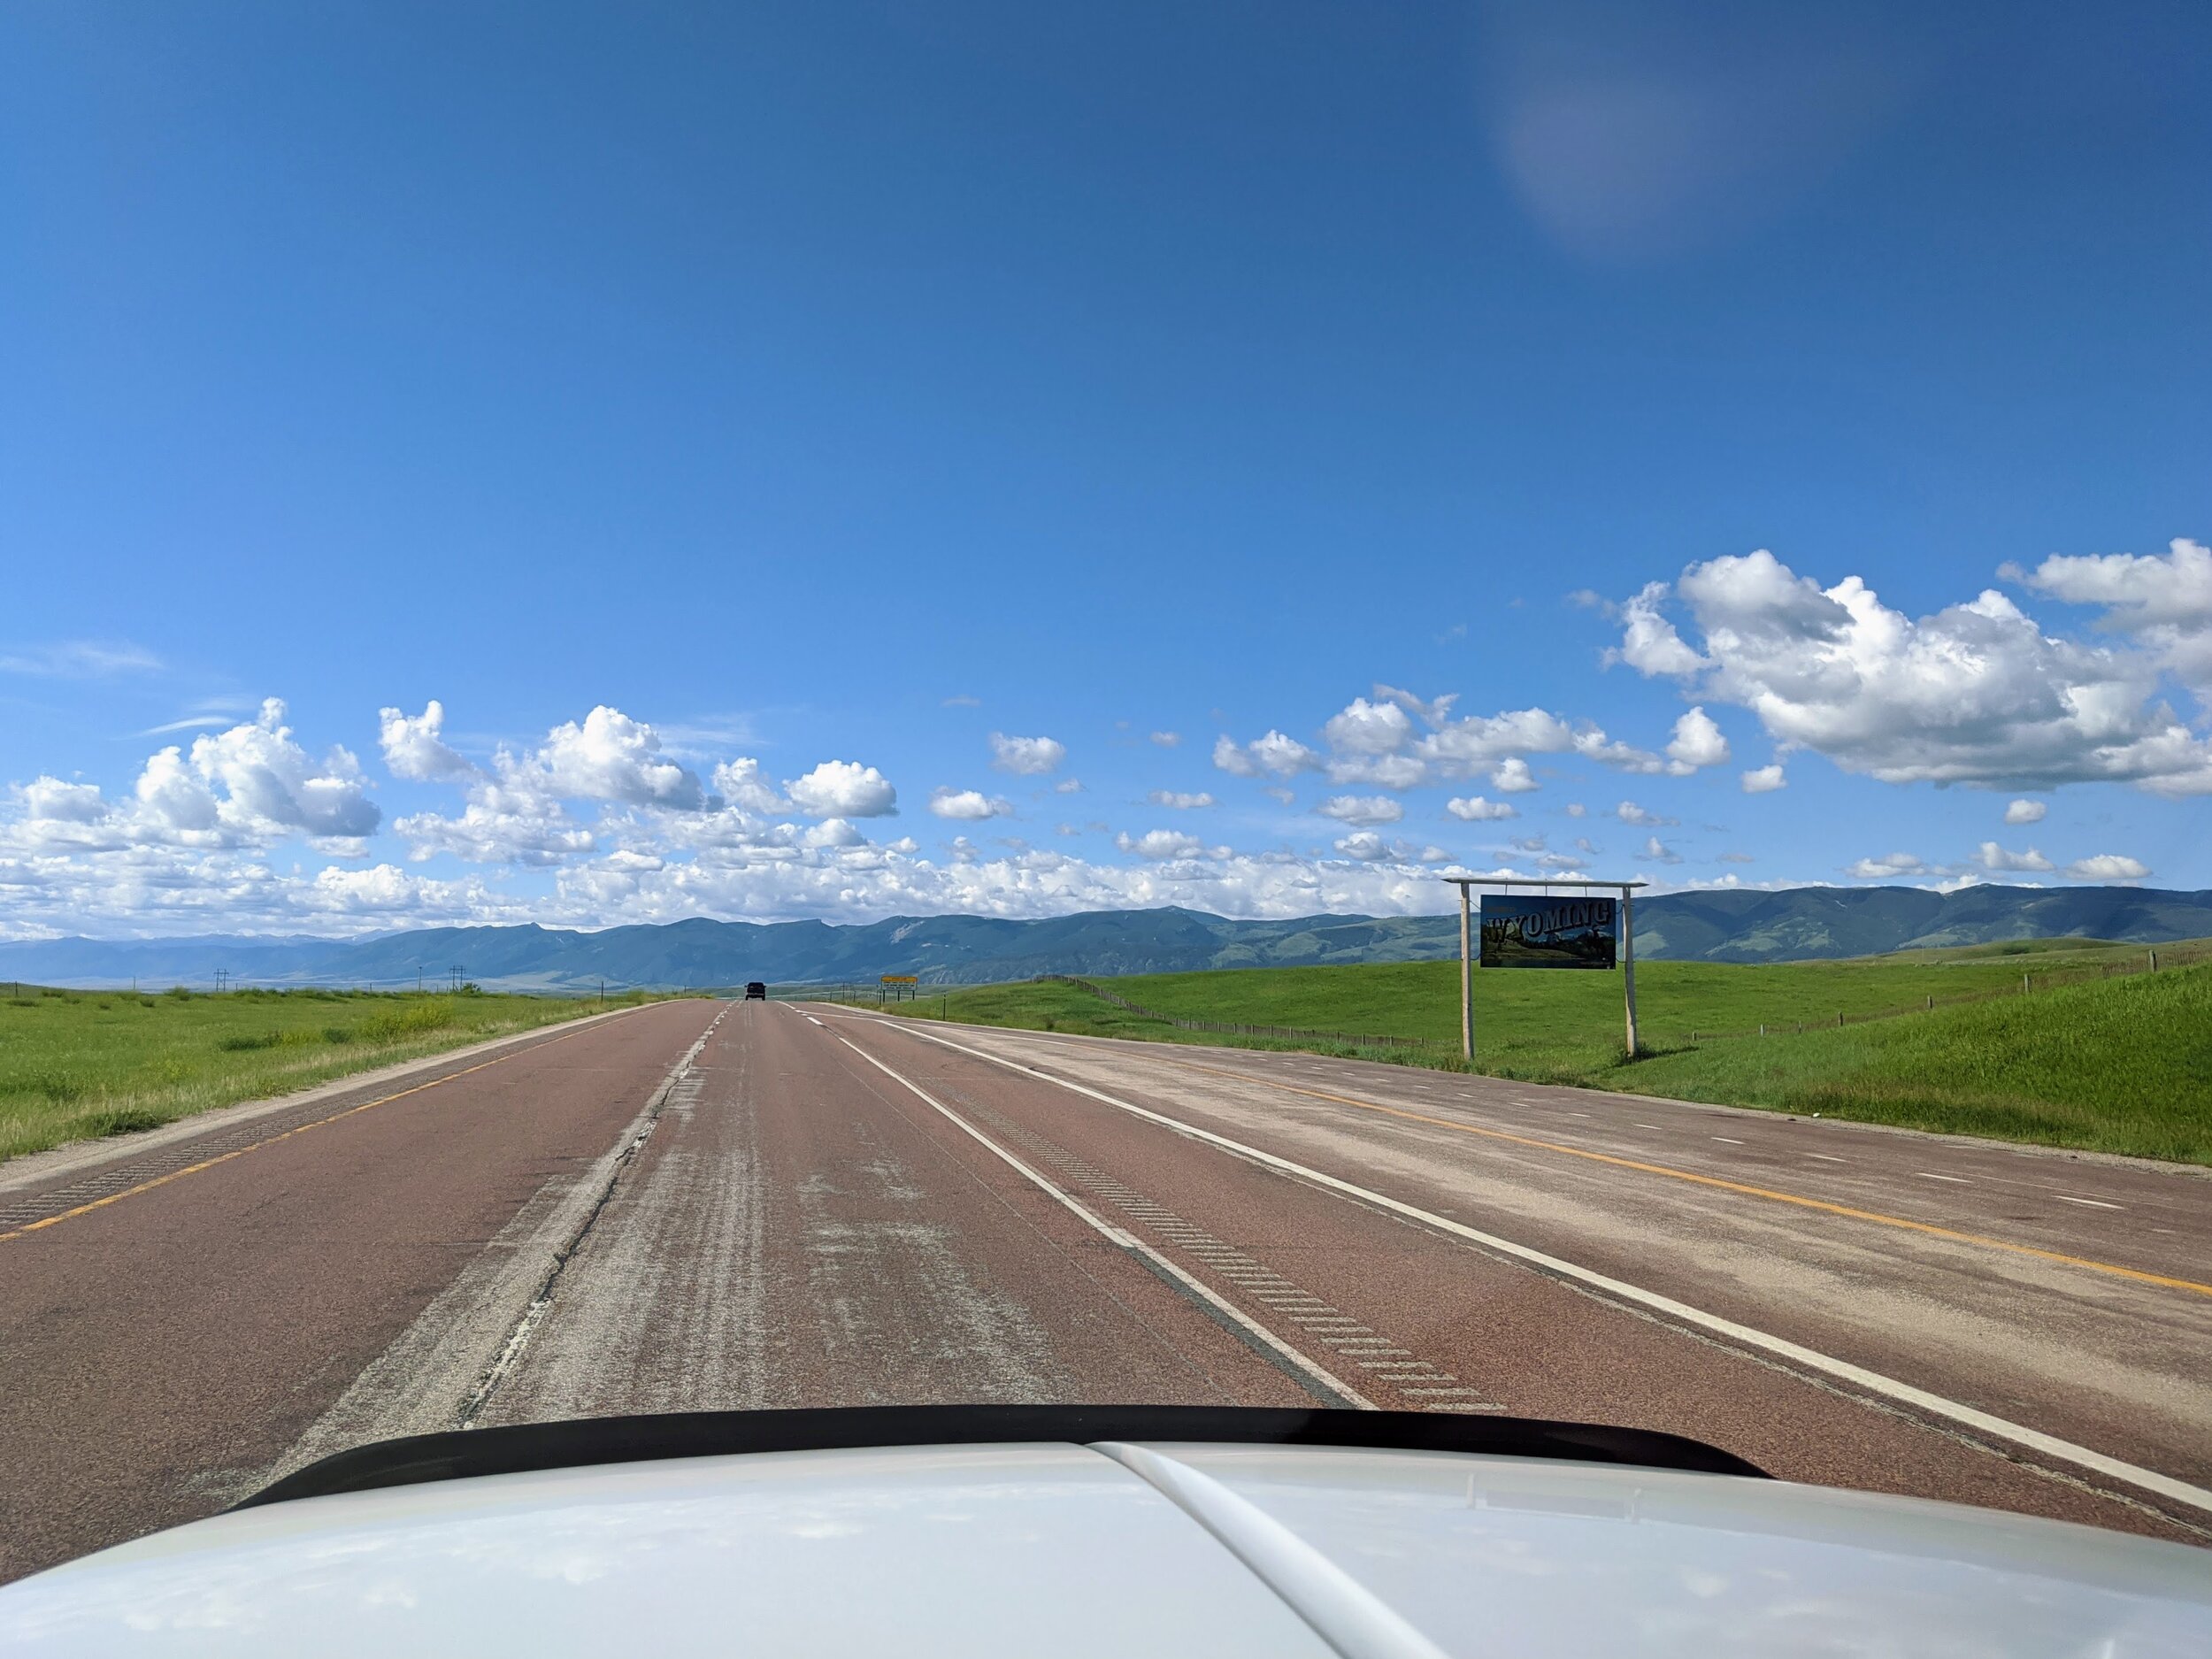 Crossing Into Wyoming